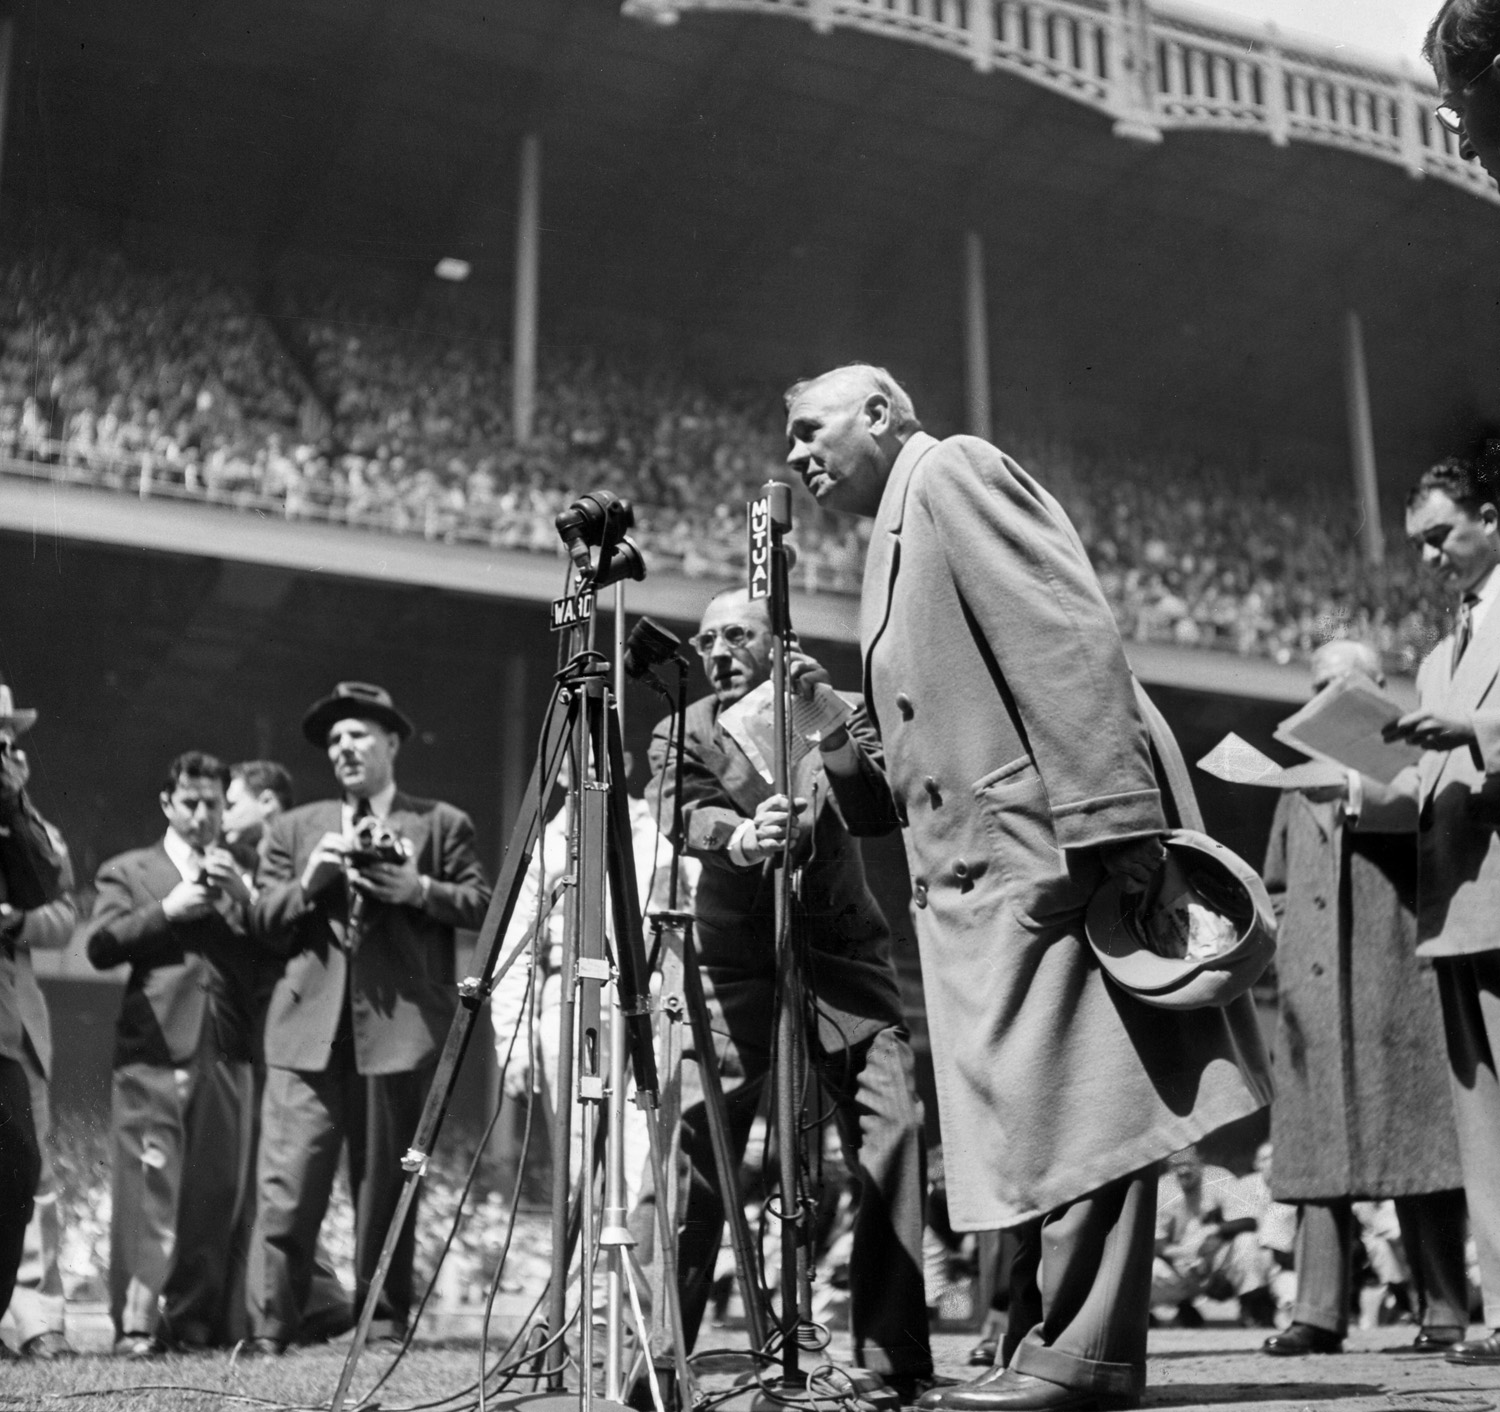 Ailing baseball great Babe Ruth thanks the crowd at Yankee Stadium for their ovation on "Babe Ruth Day," April 27, 1947.